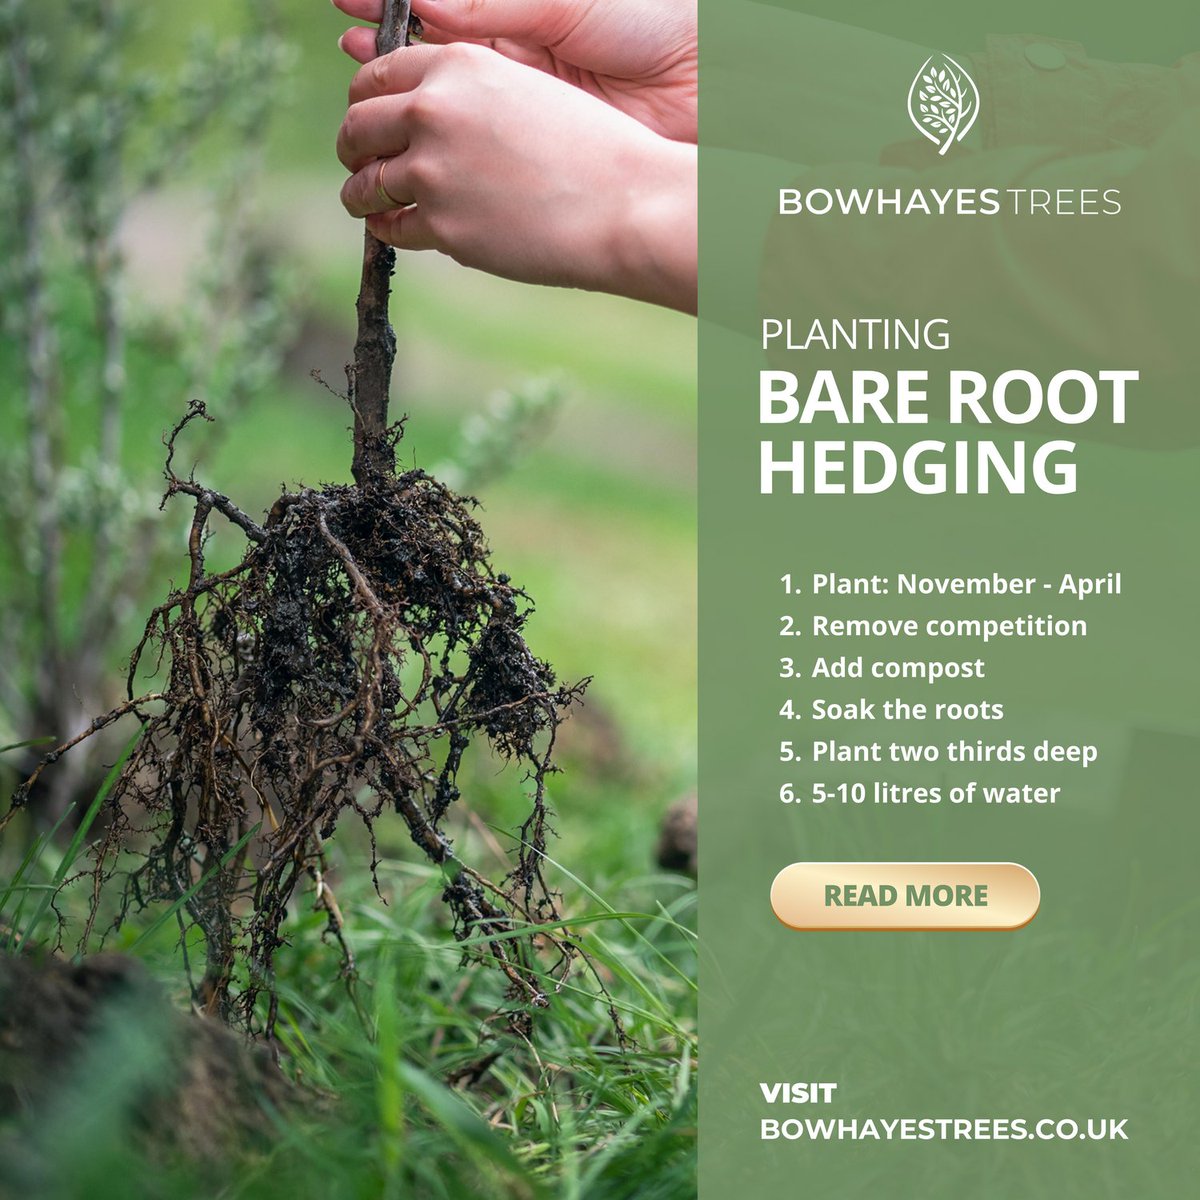 Need help deciding which bare root hedging is for you? Visit our blog:
bowhayestrees.co.uk/post/exploring…

#barerootseason #bareroothedging #countryside #britishcountryside #farmtracks #britishfarms #privacyhedging #gardenscreening #gardenscreeningideas #hedgesforwildlife